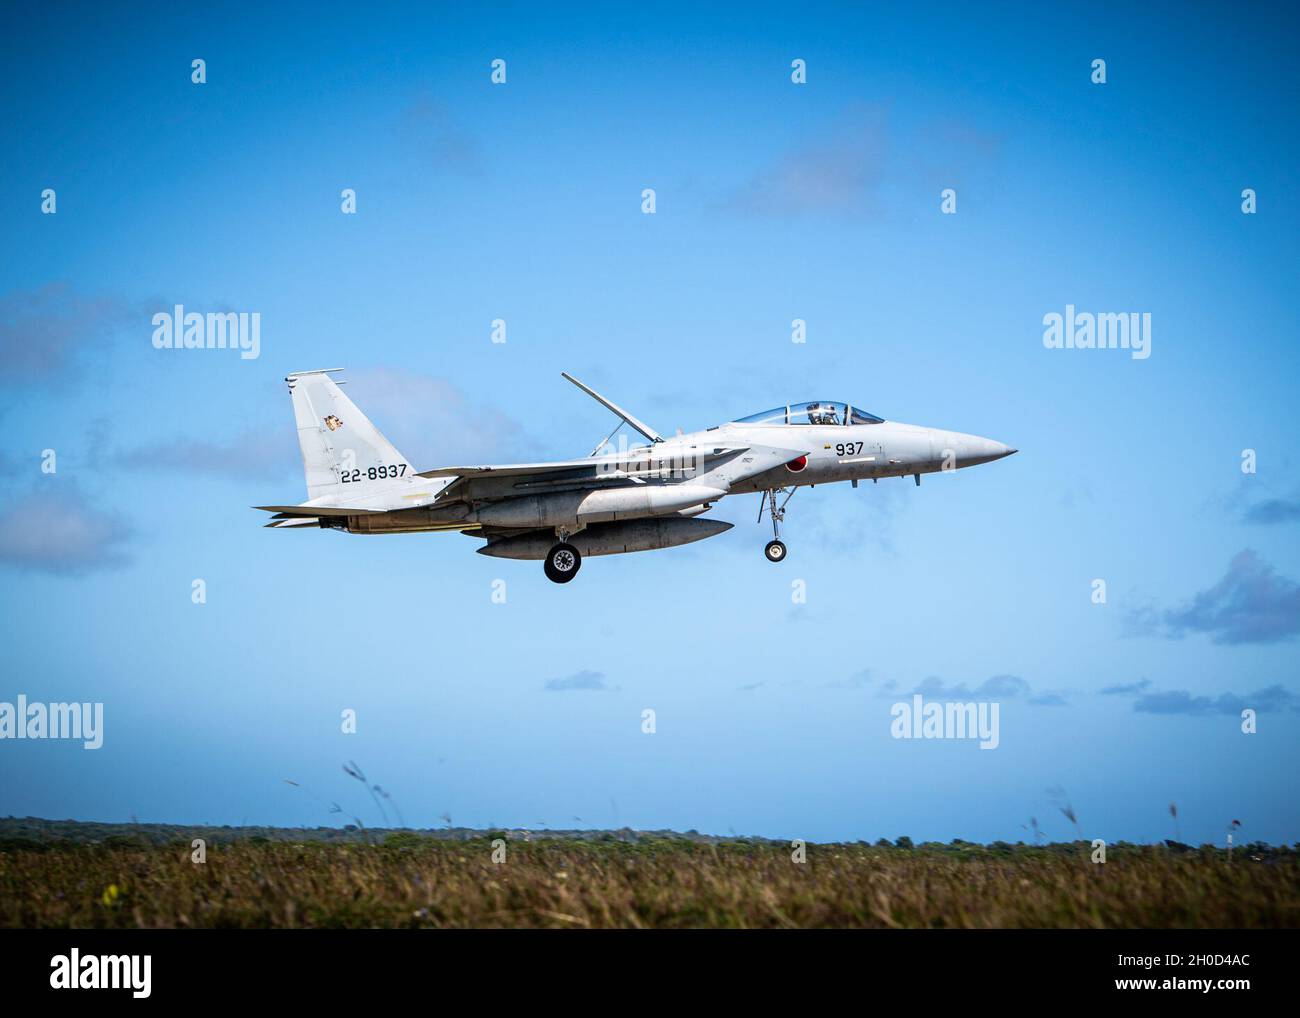 A Japan Air Self-Defense Force, or Koku-Jieitai, F-15J Eagle prepares to land at Andersen Air Force Base, Guam, during exercise Cope North 21, Jan. 28, 2021.  Cope North is an annual exercise that serves as a keystone event to promote stability and security throughout the Indo-Pacific. Stock Photo